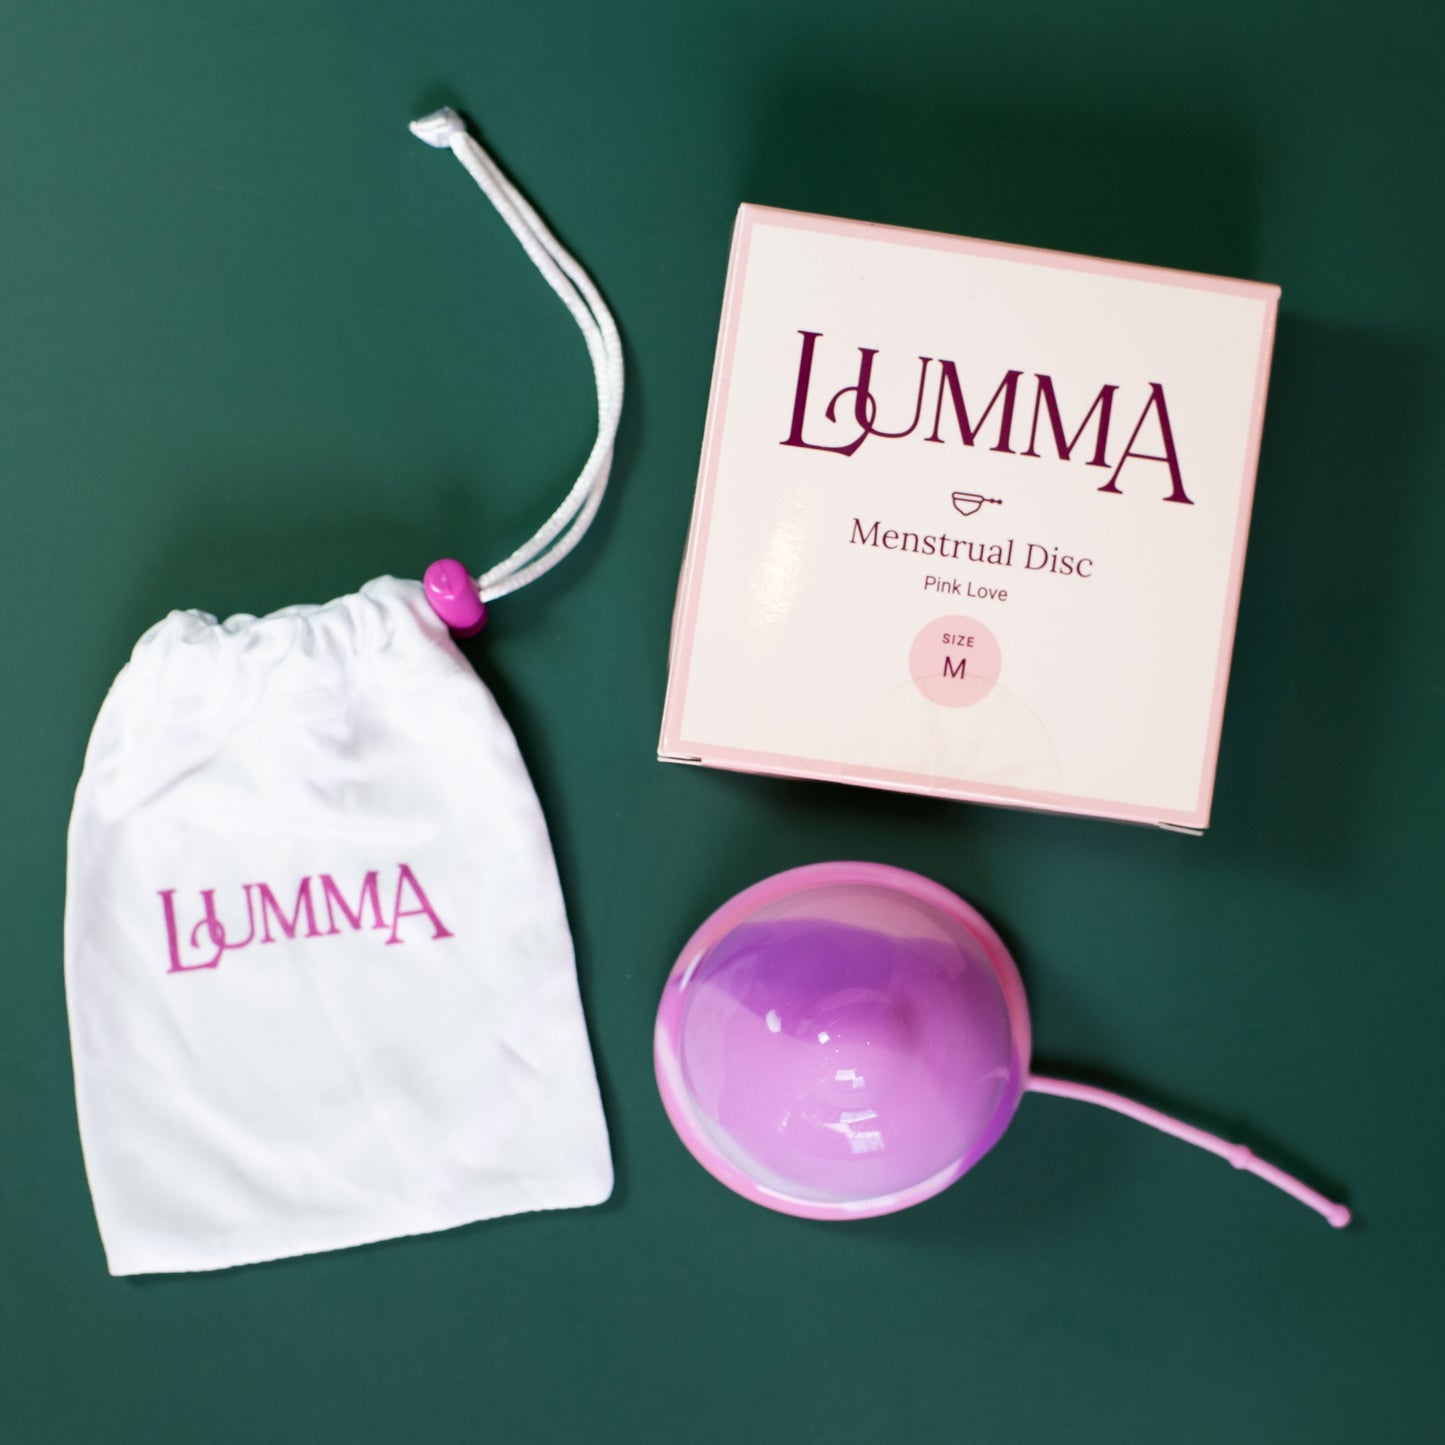 Lumma menstrual disc size Medium in pink with packaging and bag